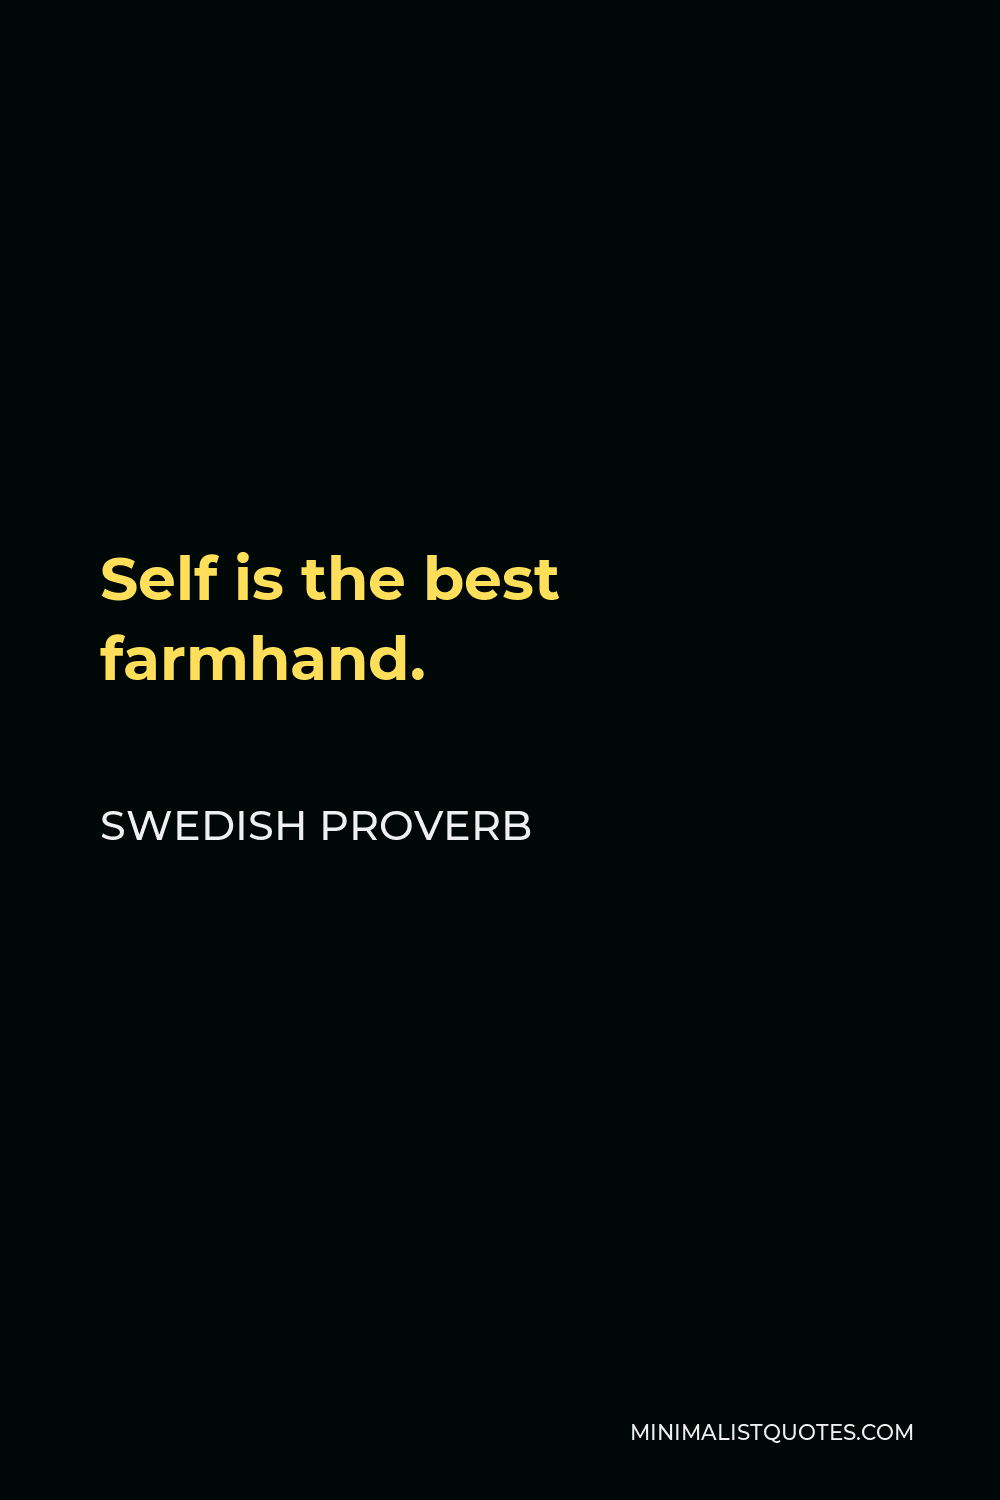 Swedish Proverb Quote - Self is the best farmhand.